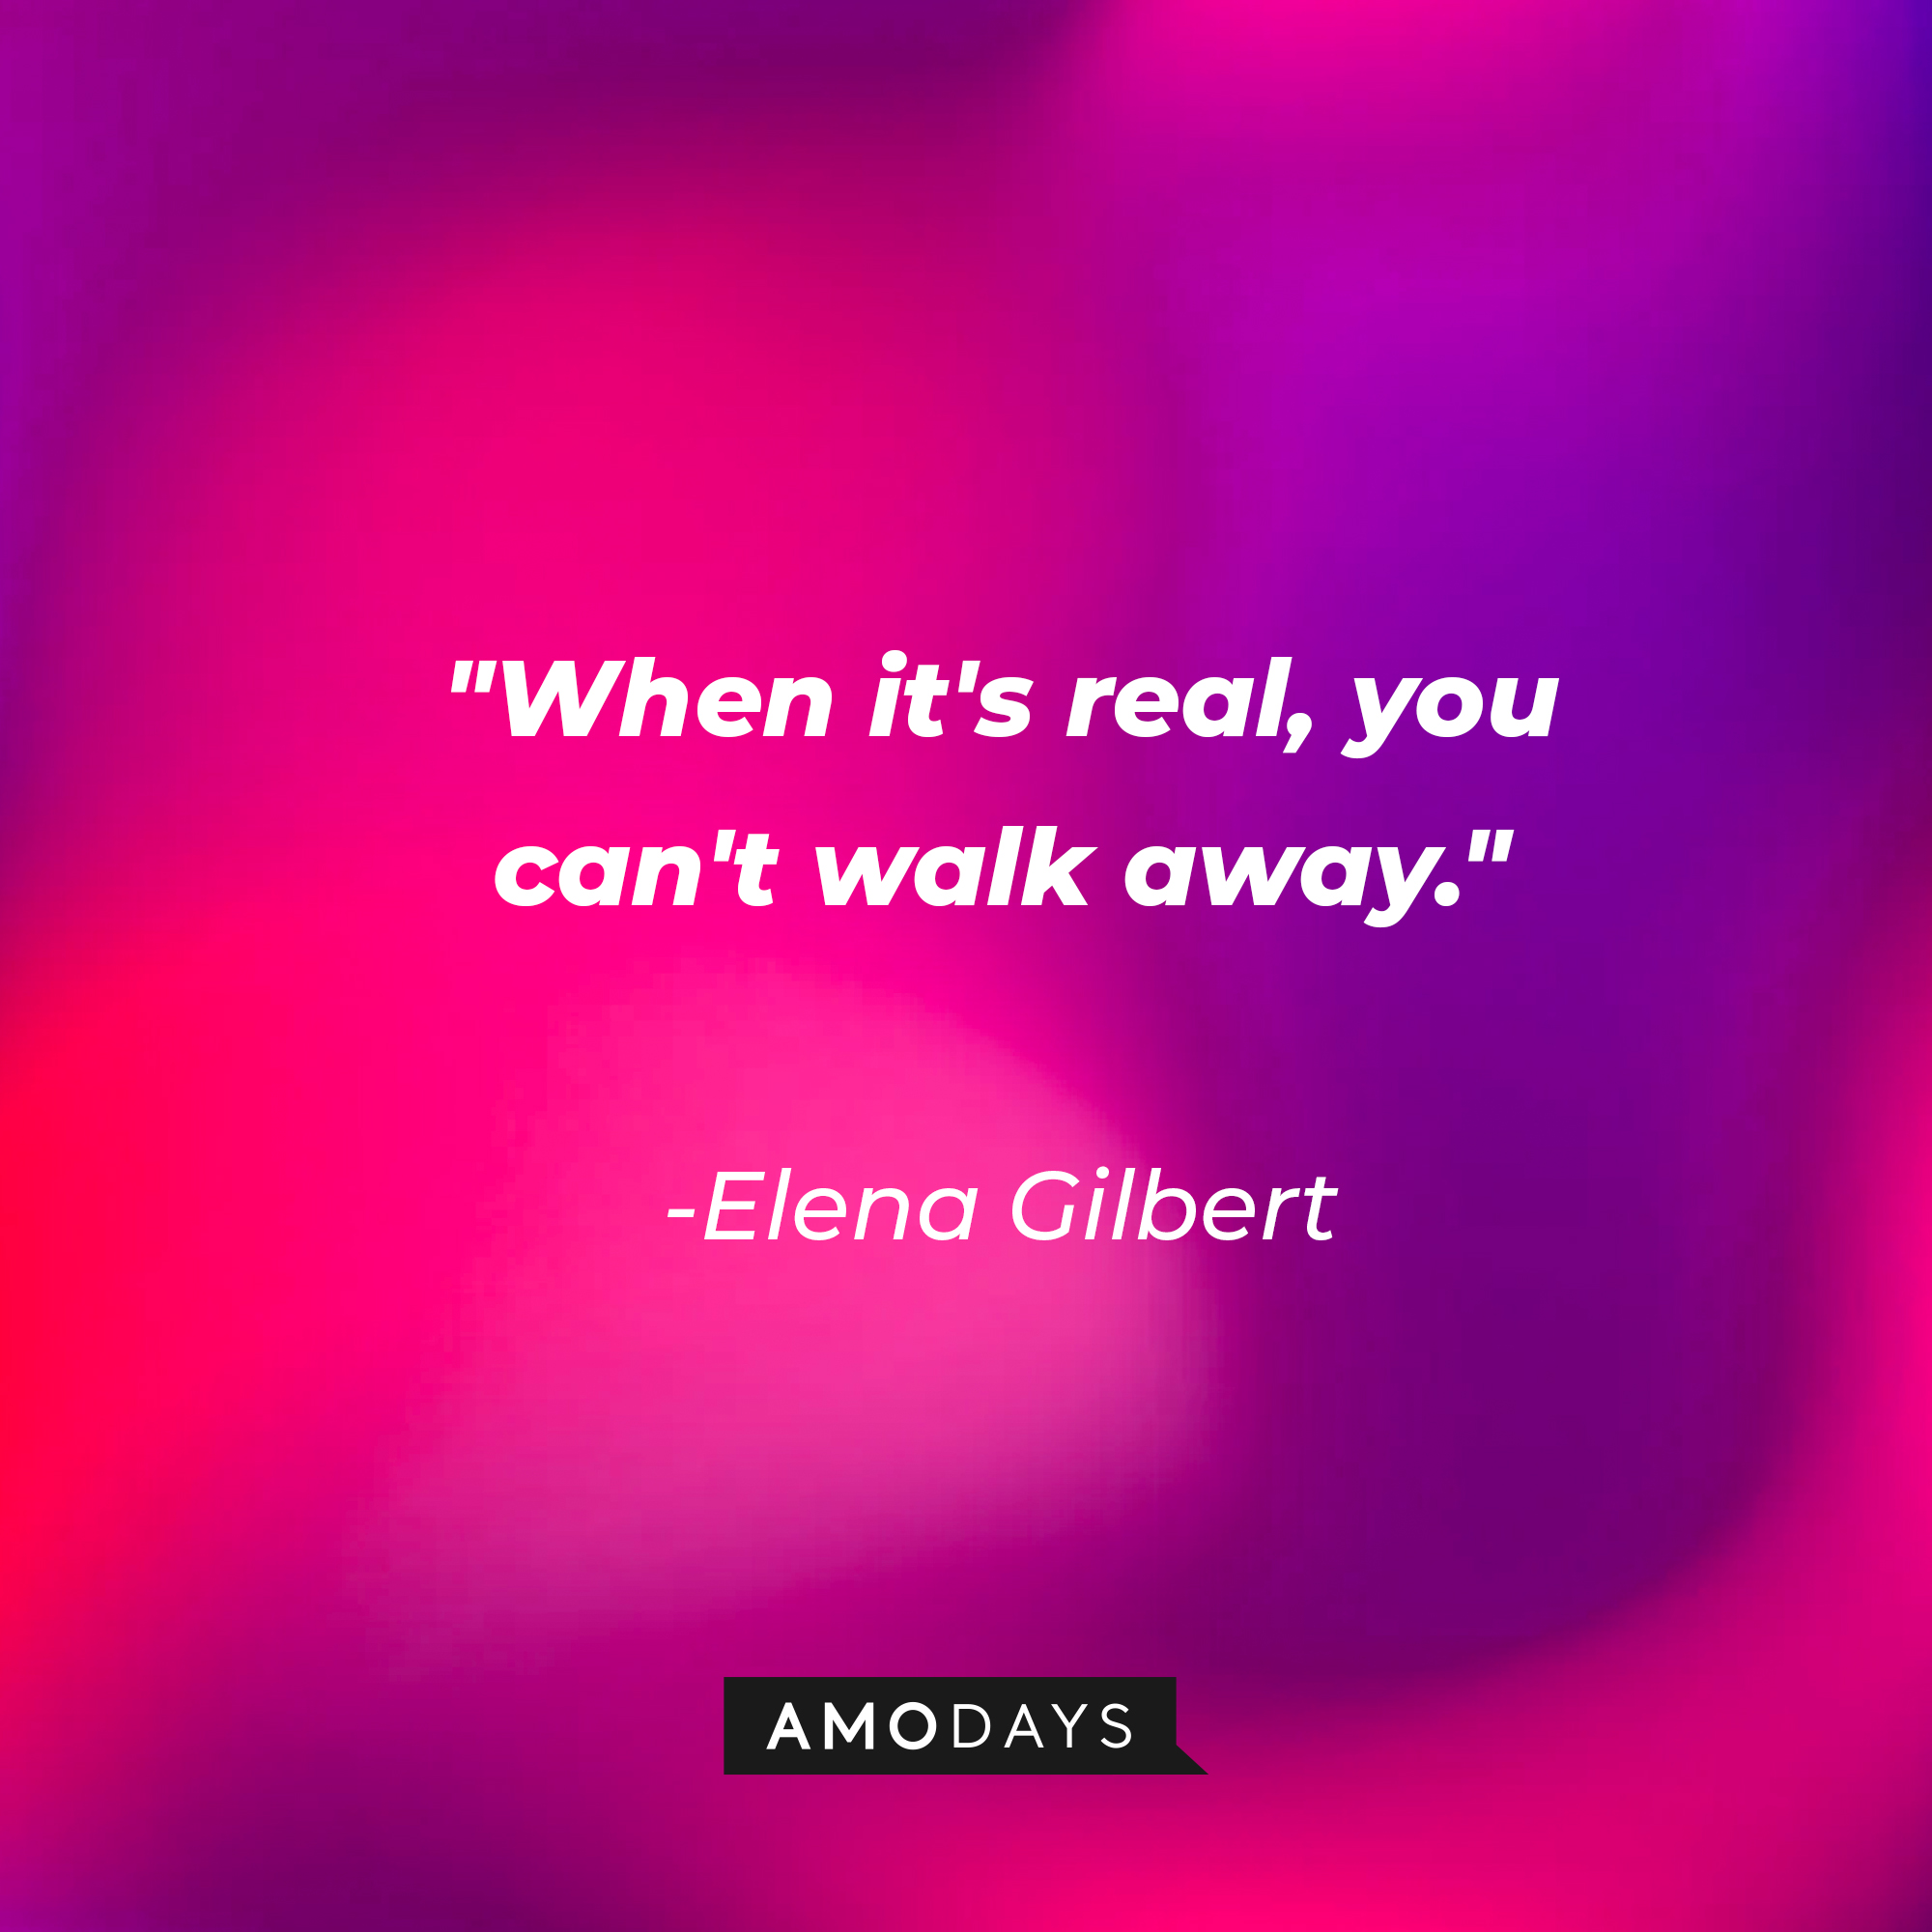 Elena Gilbert's quote: "When it's real, you can't walk away." | Image: AmoDays